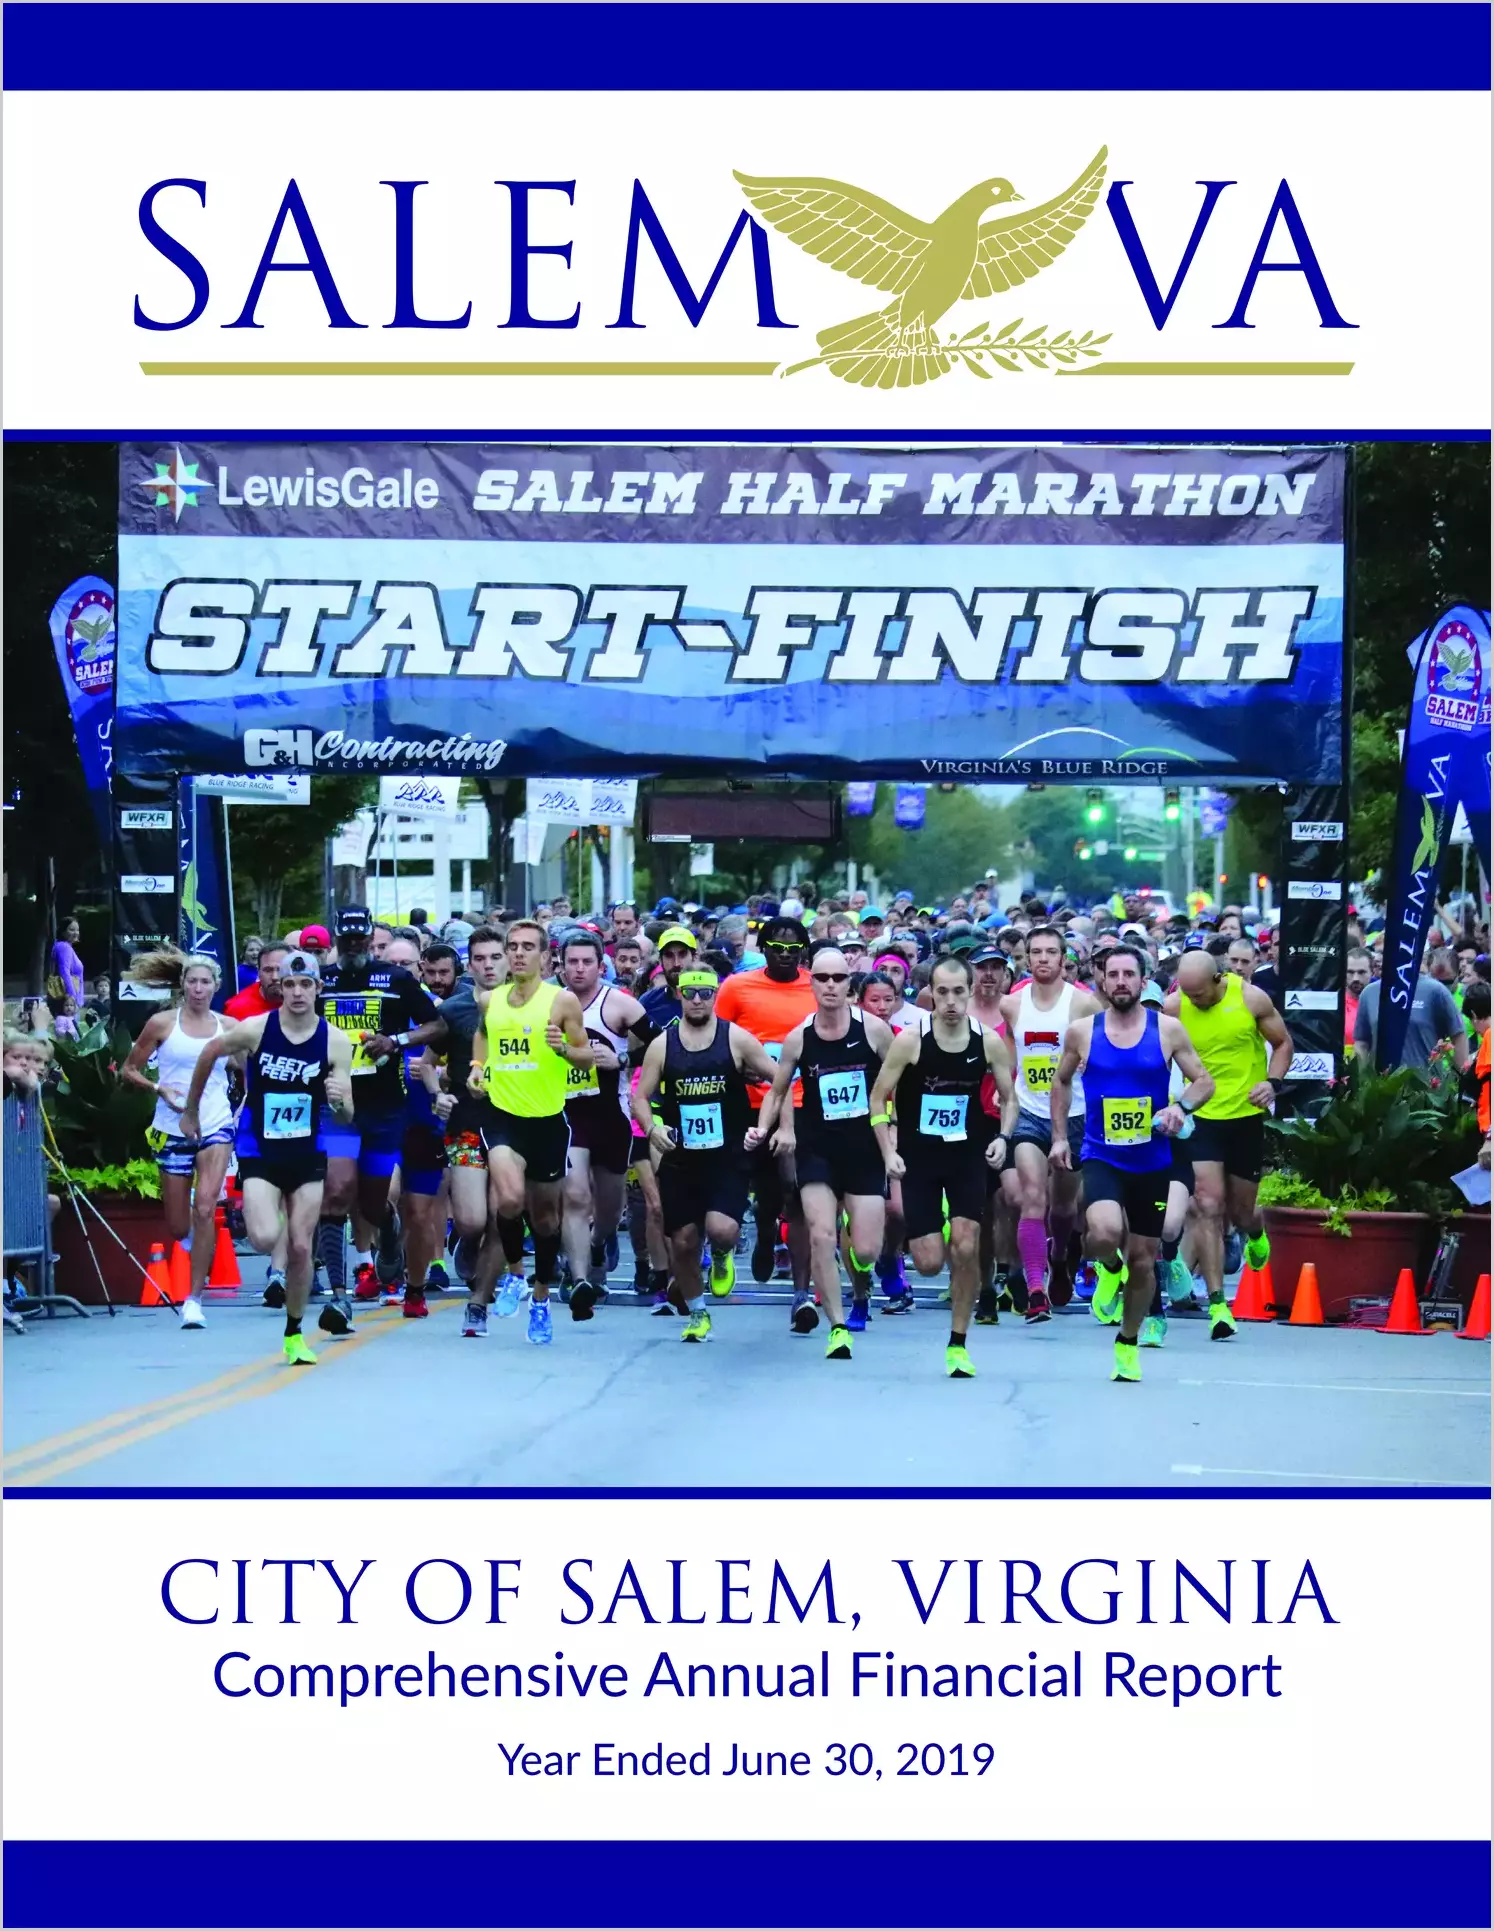 2019 Annual Financial Report for City of Salem